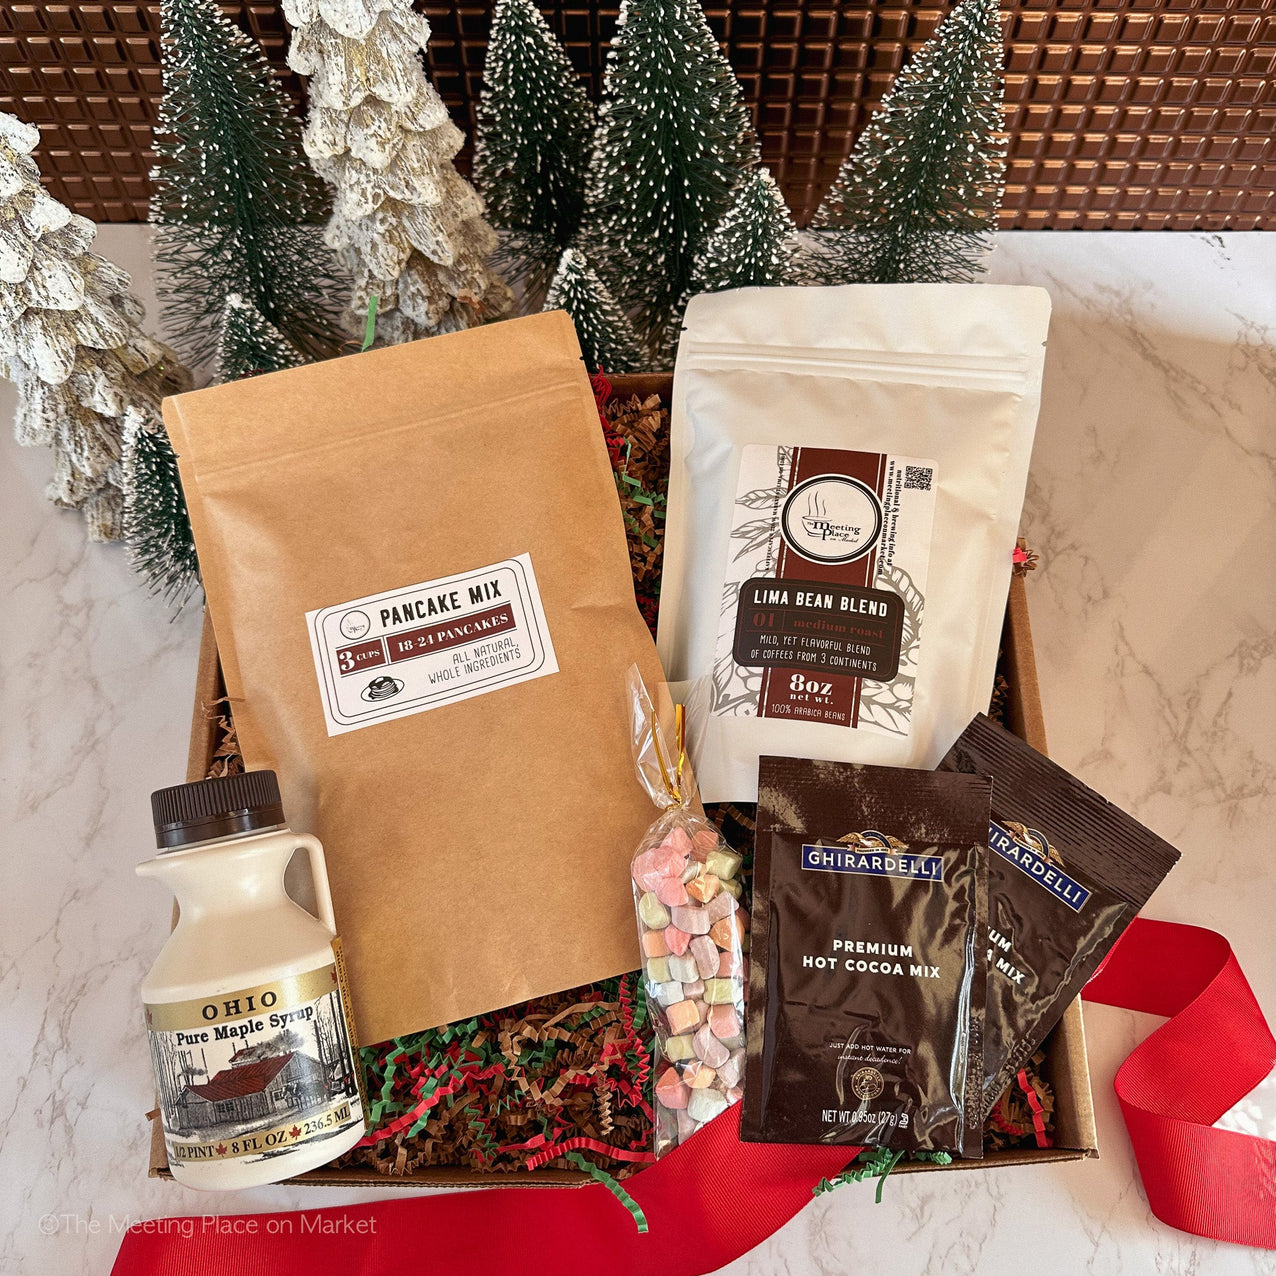 Christmas Breakfast with Santa Gift Box Christmas Gift Basket - The Meeting Place on Market